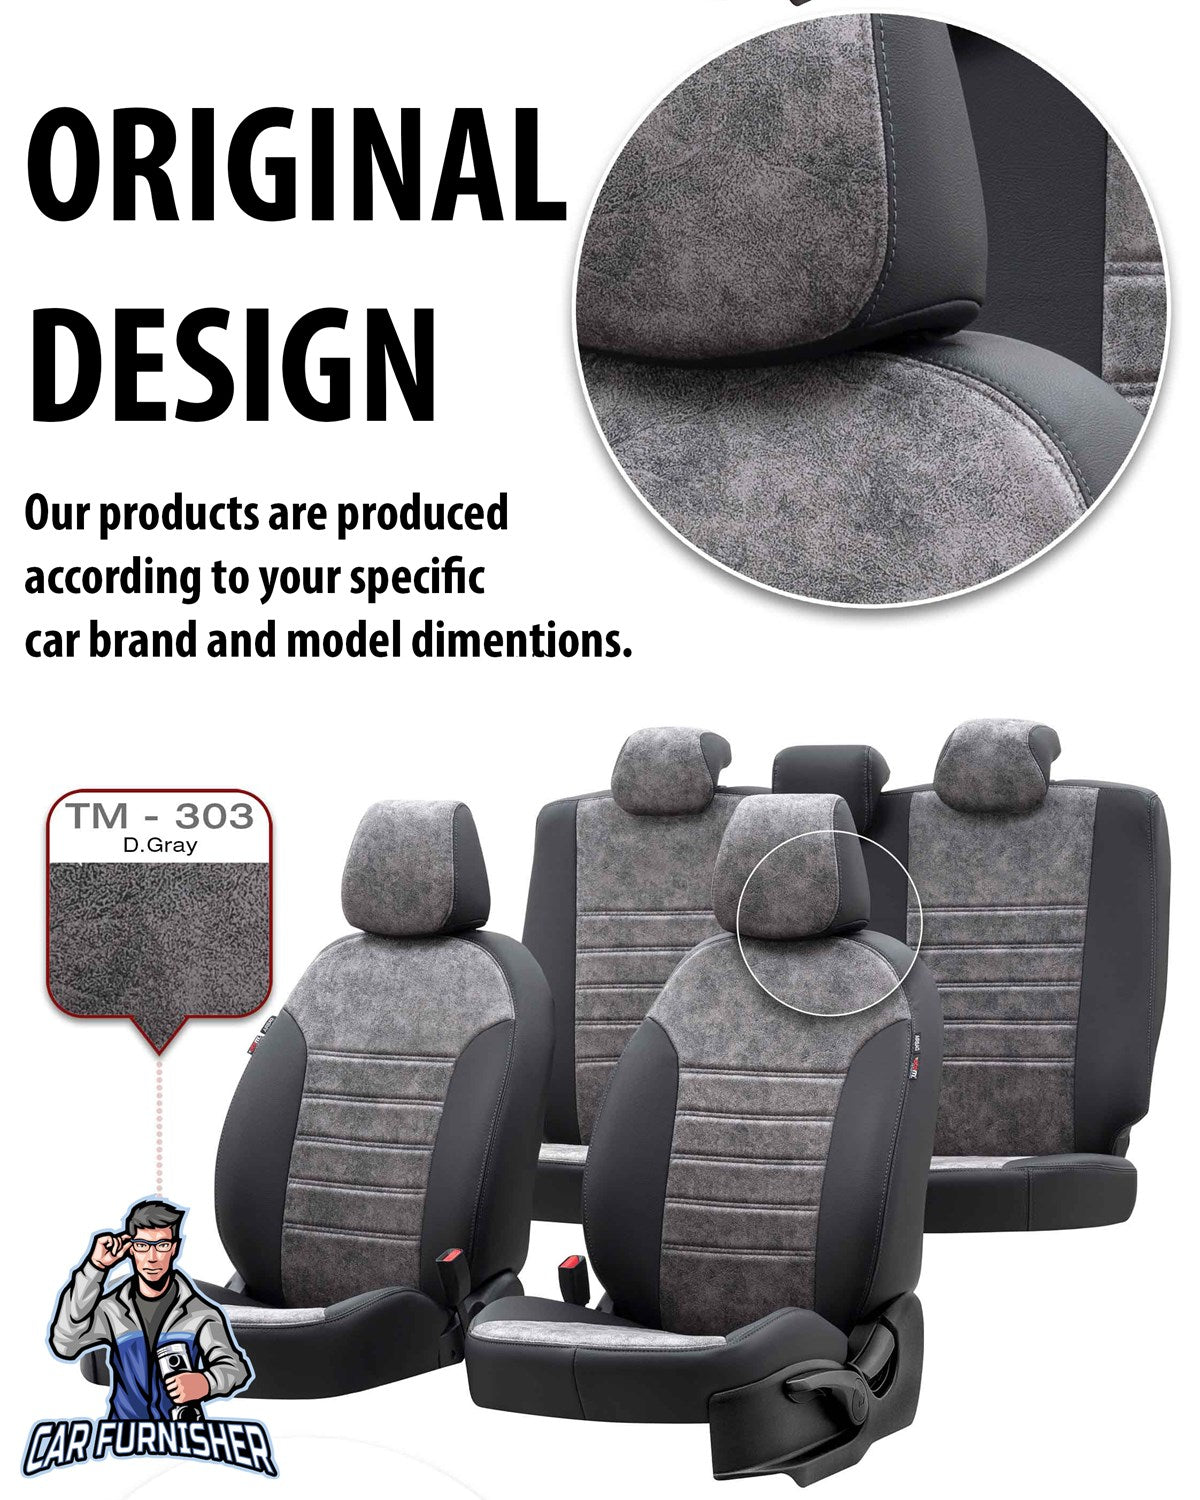 Skoda Scala Seat Covers Milano Suede Design Ivory Leather & Suede Fabric